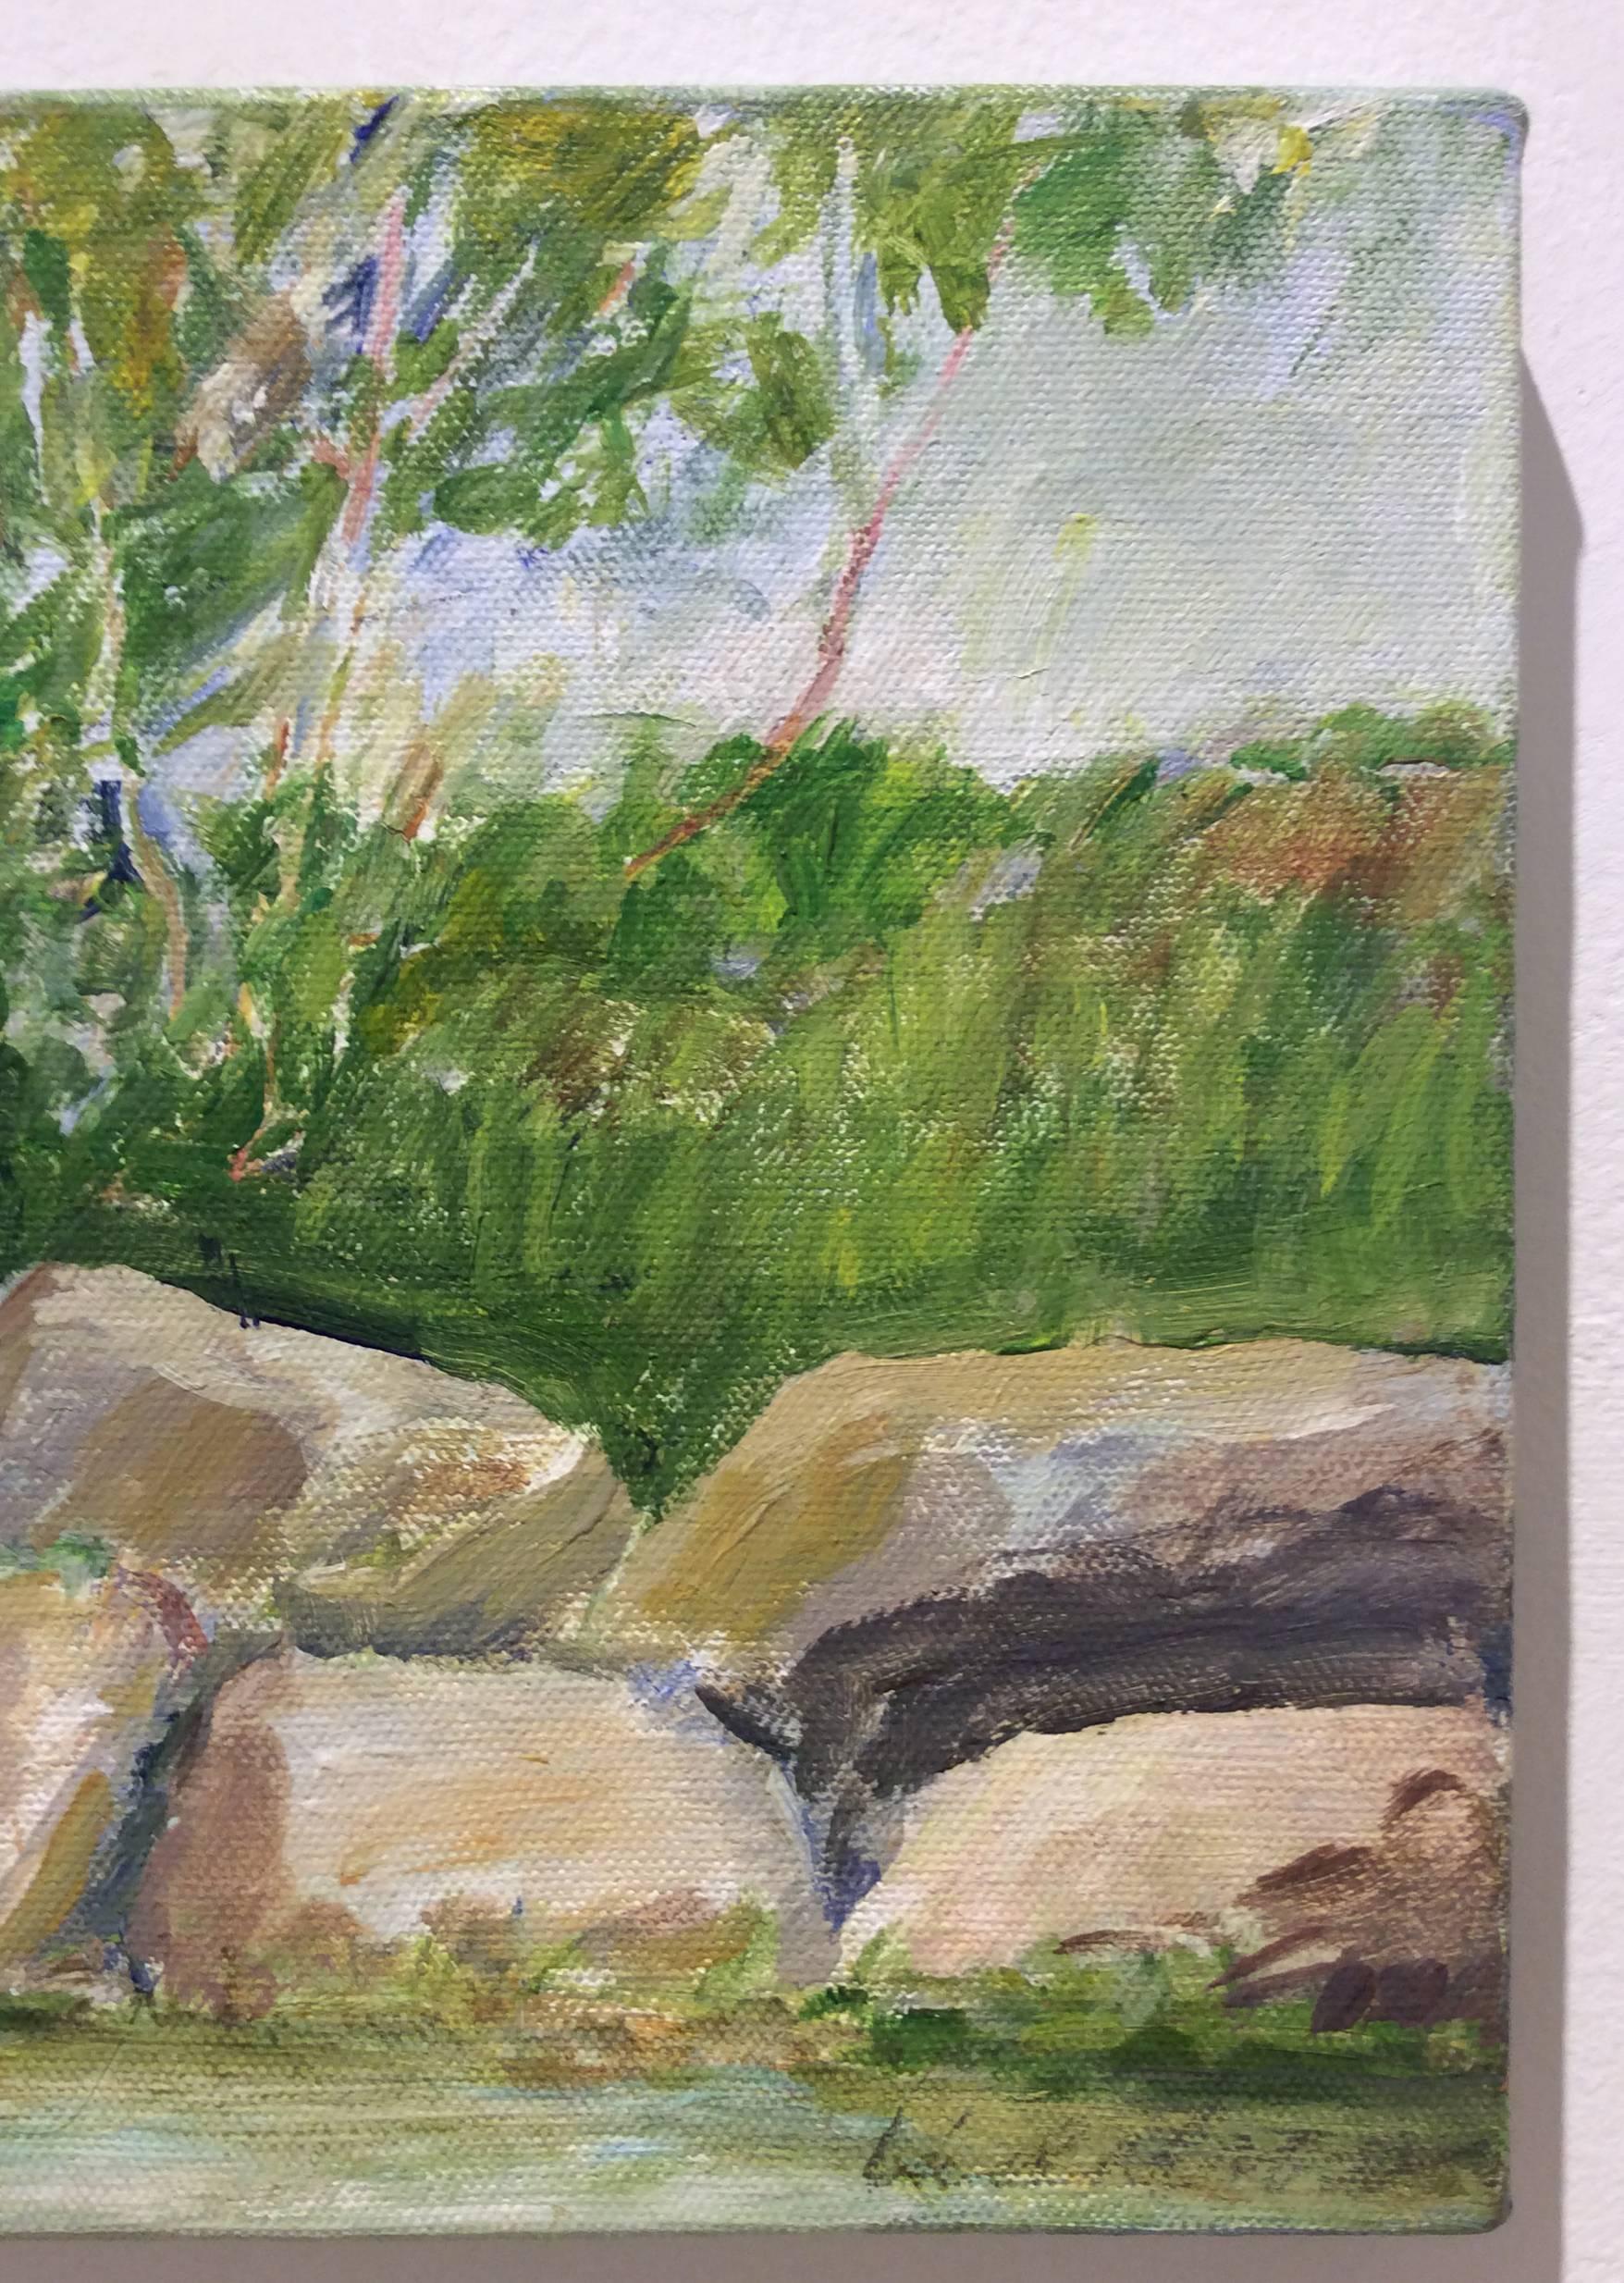 acrylic painting on canvas
8 x 10 inches

This contemporary landscape painting was made by Hudson Valley based artist, Linda Cross. The composition is largely focused on lush green trees lined with large rocks painted with gestural strokes in light